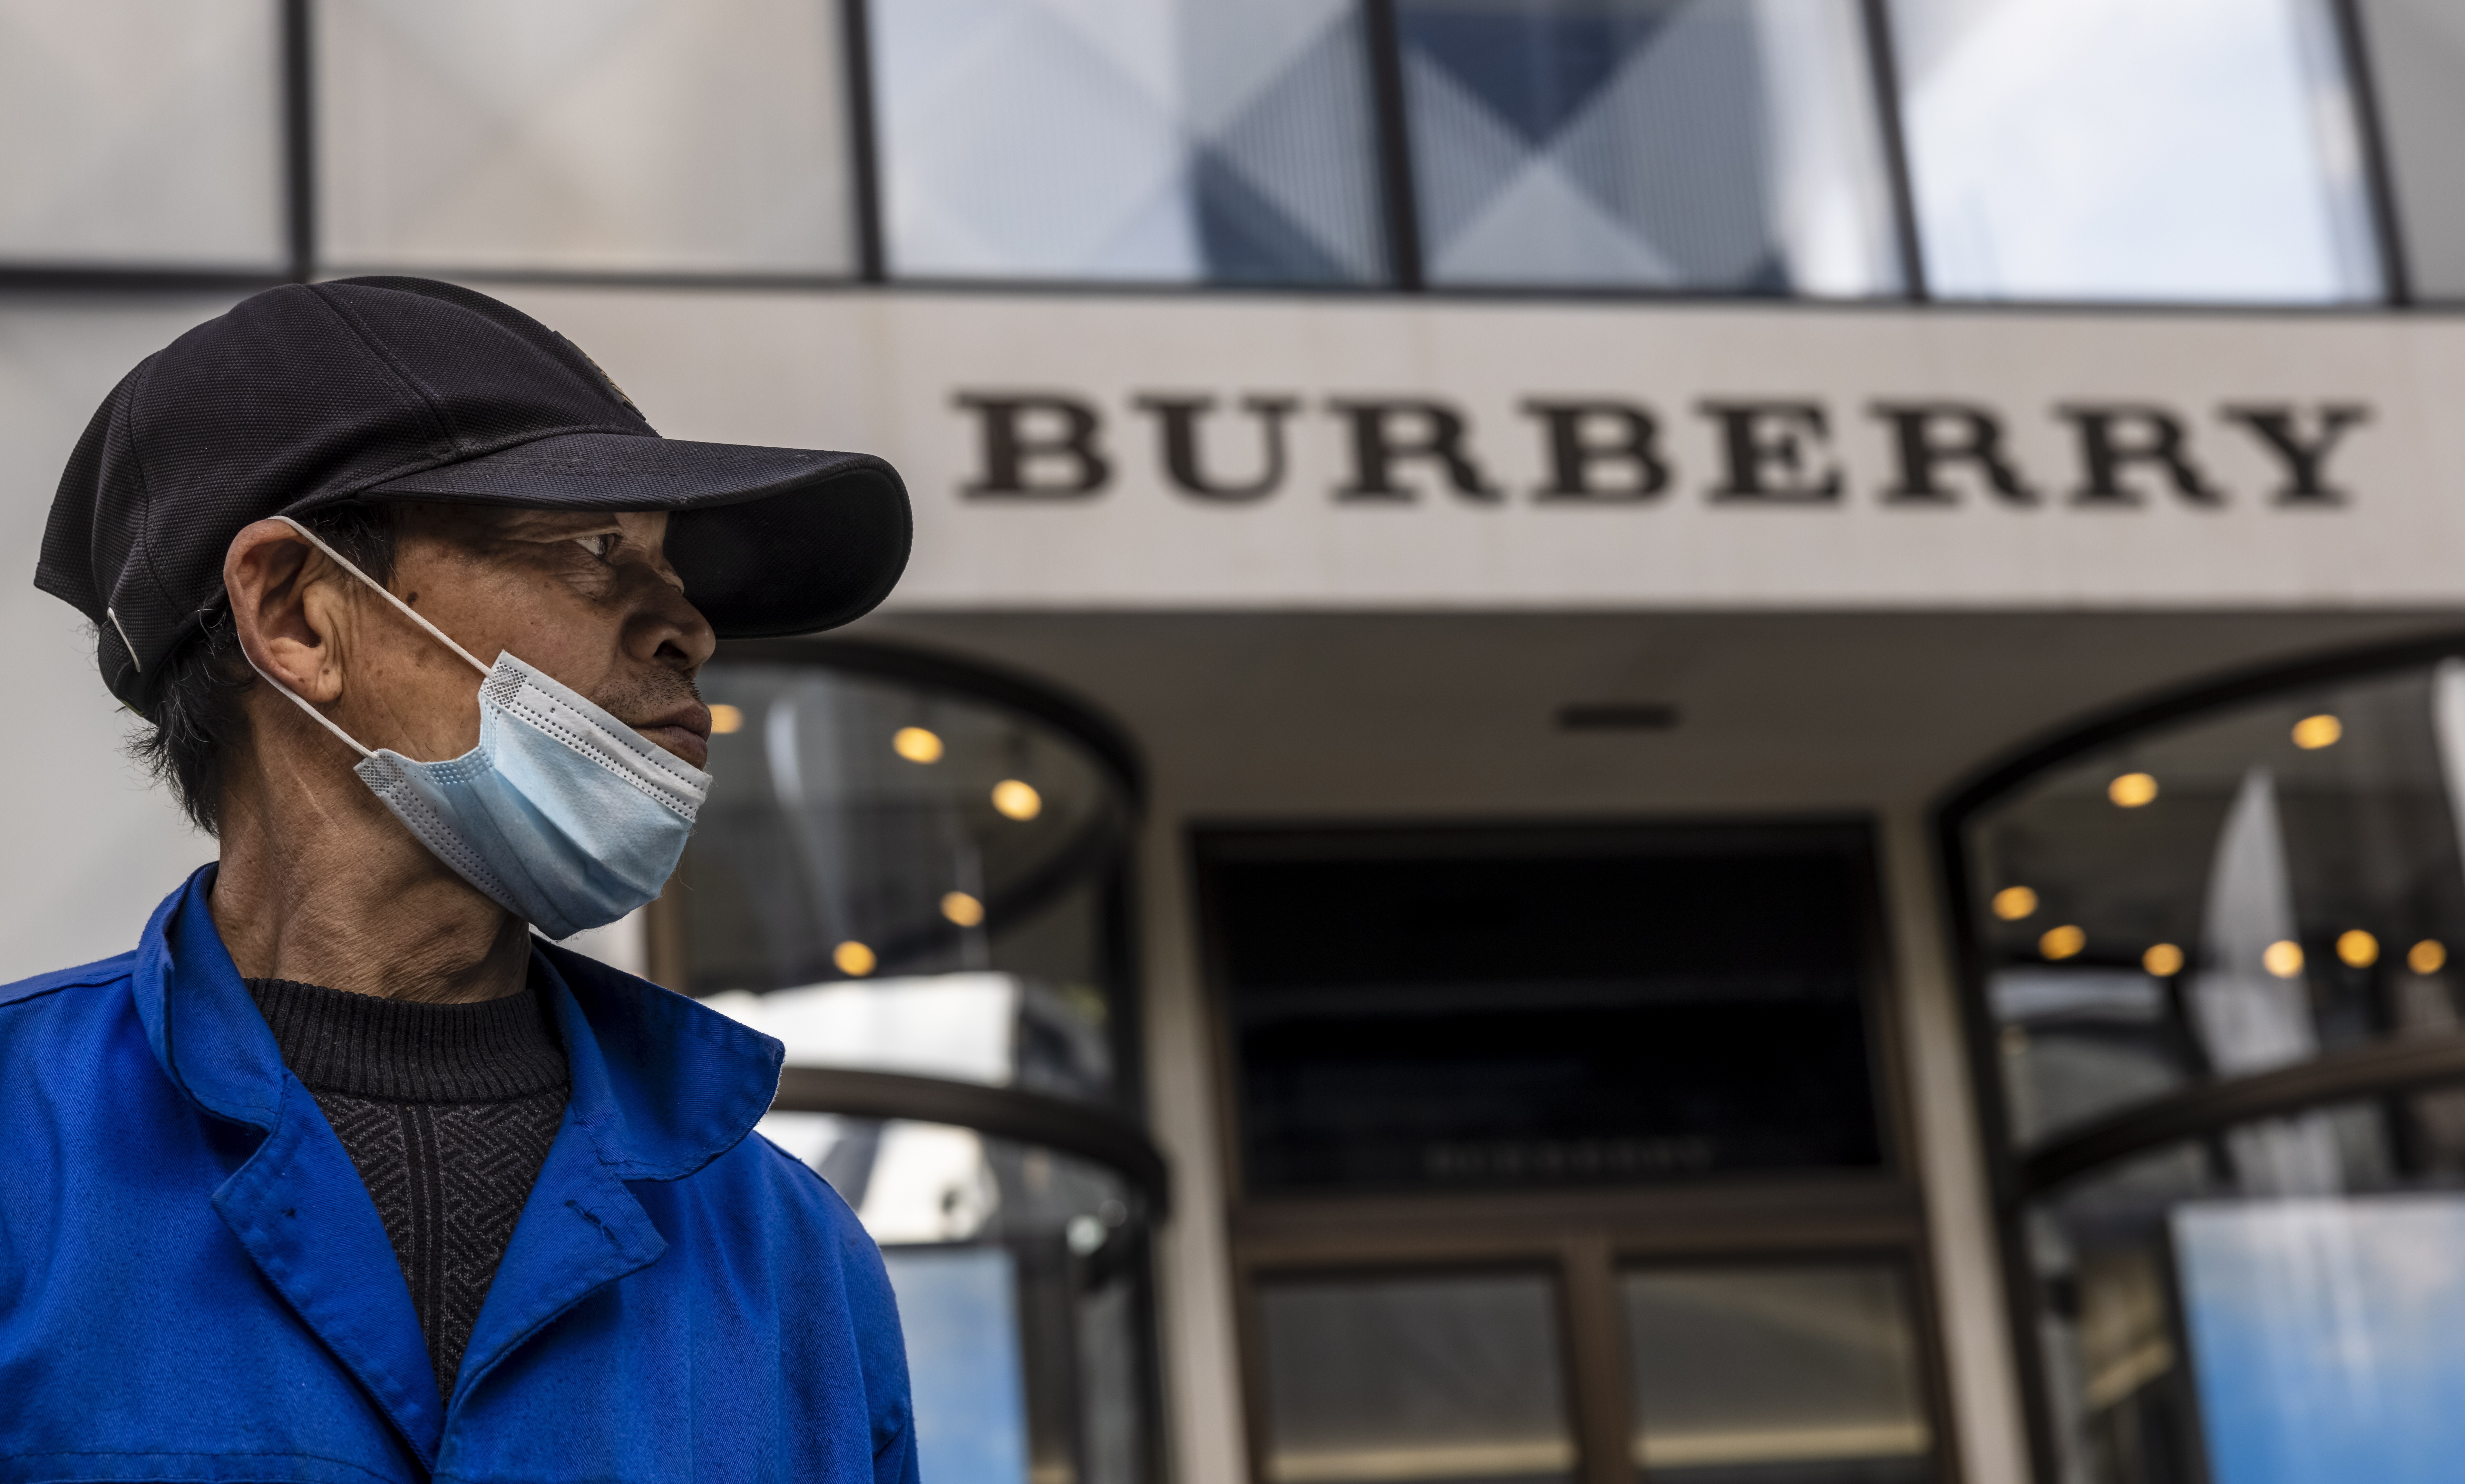 Burberry may have to deal with a new kind of nationalism, over its membership of the Better Cotton Initiative. Photo: EPA-EFE